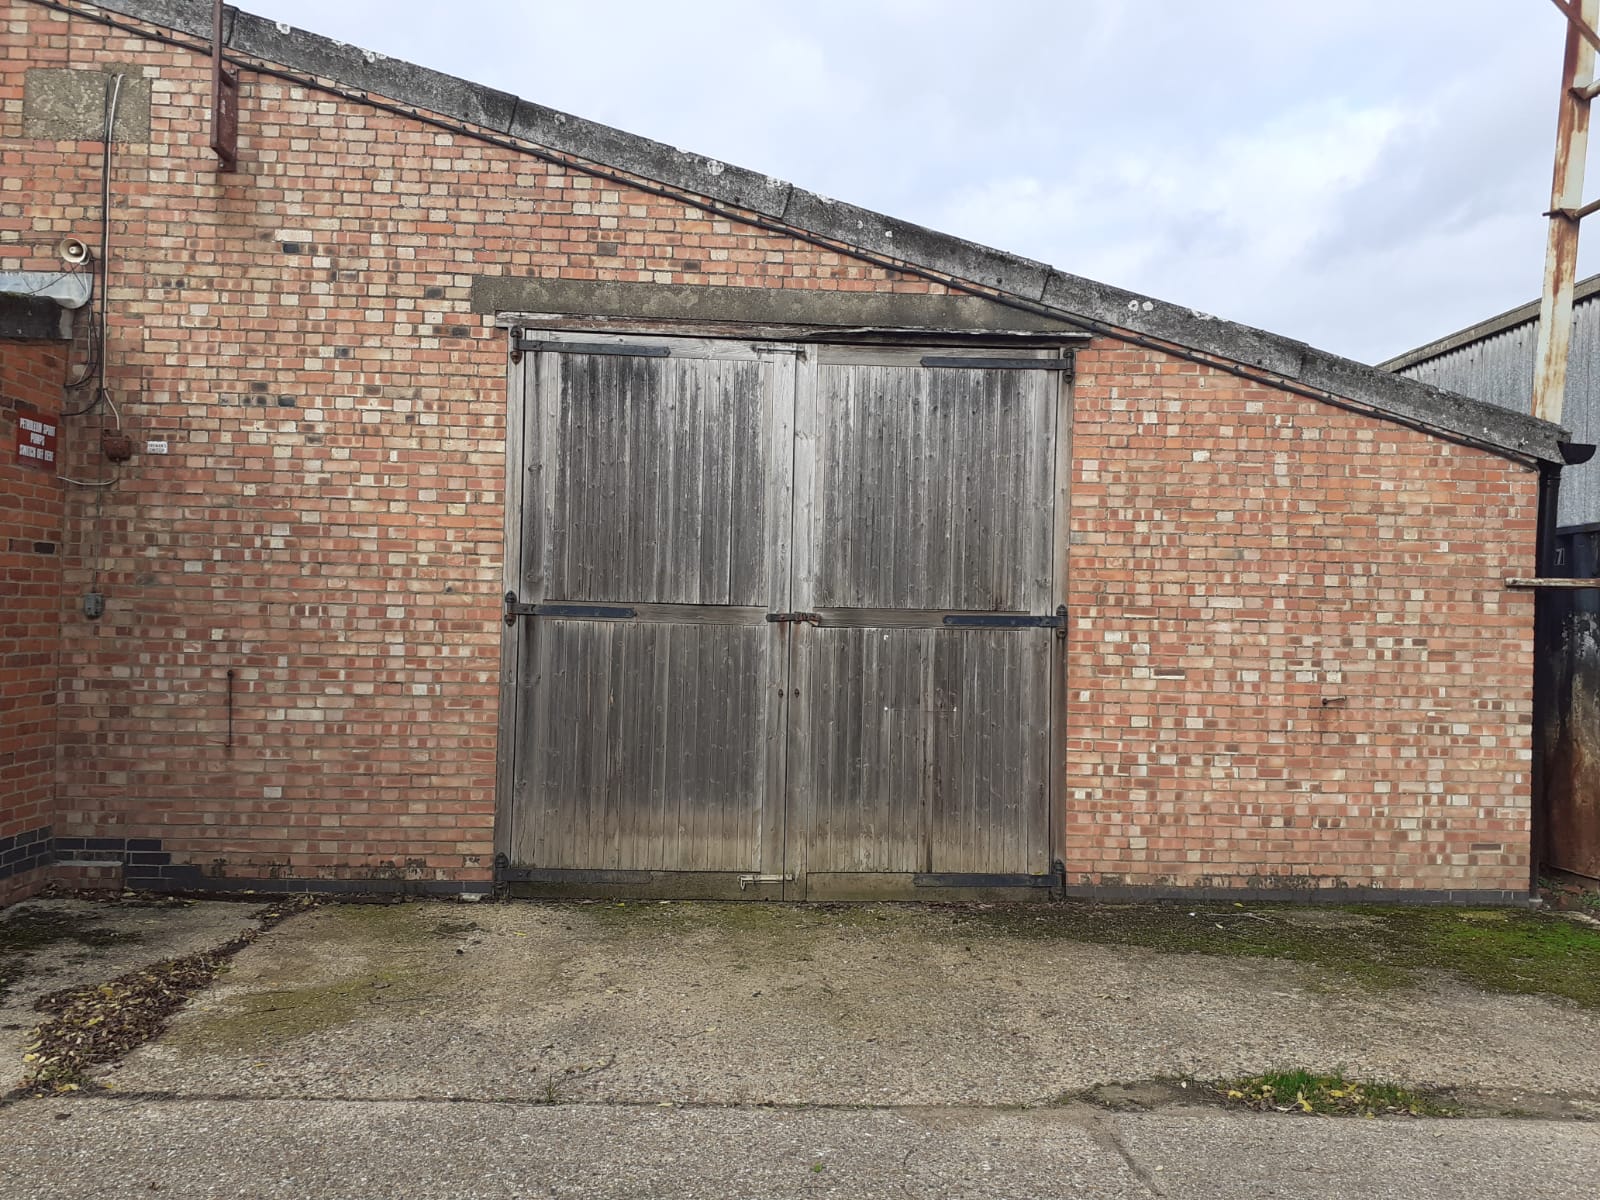 Warehouse/Storage to Let near Mountnessing,Brentwood,Essex